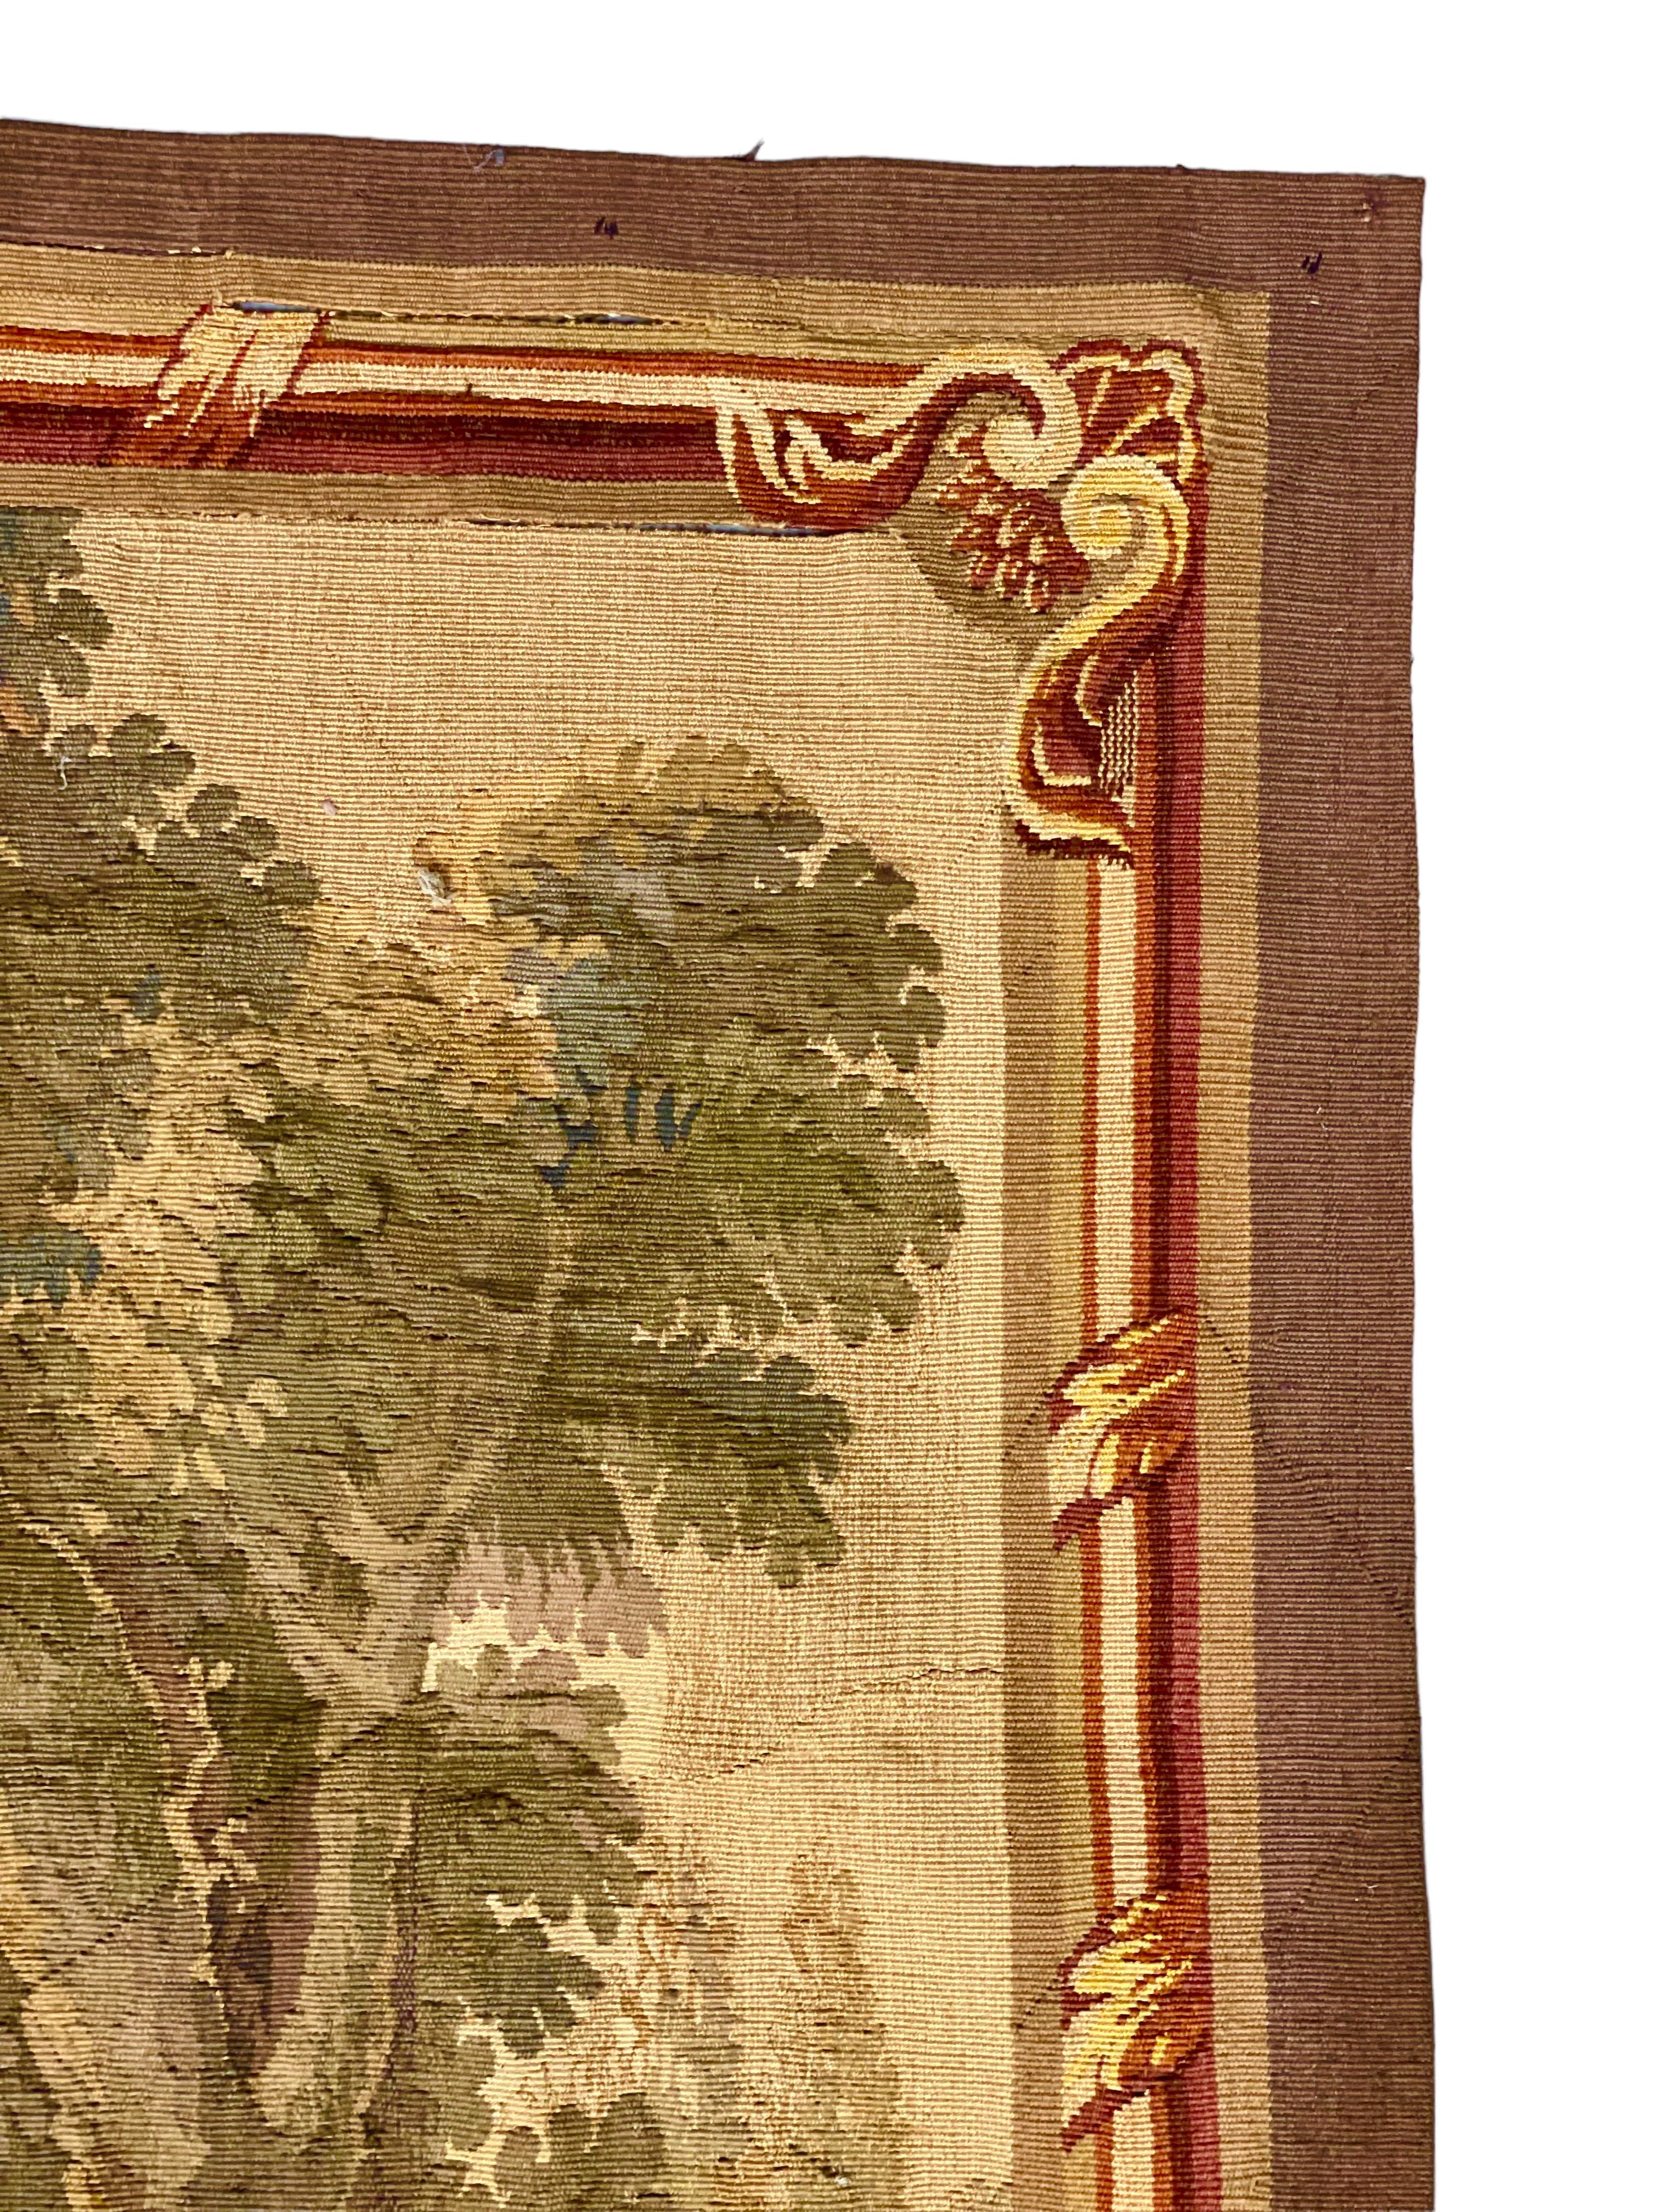 Hand-Woven French Aubusson Pastoral Tapestry featuring a Gallant Scene, Late 19th Century For Sale